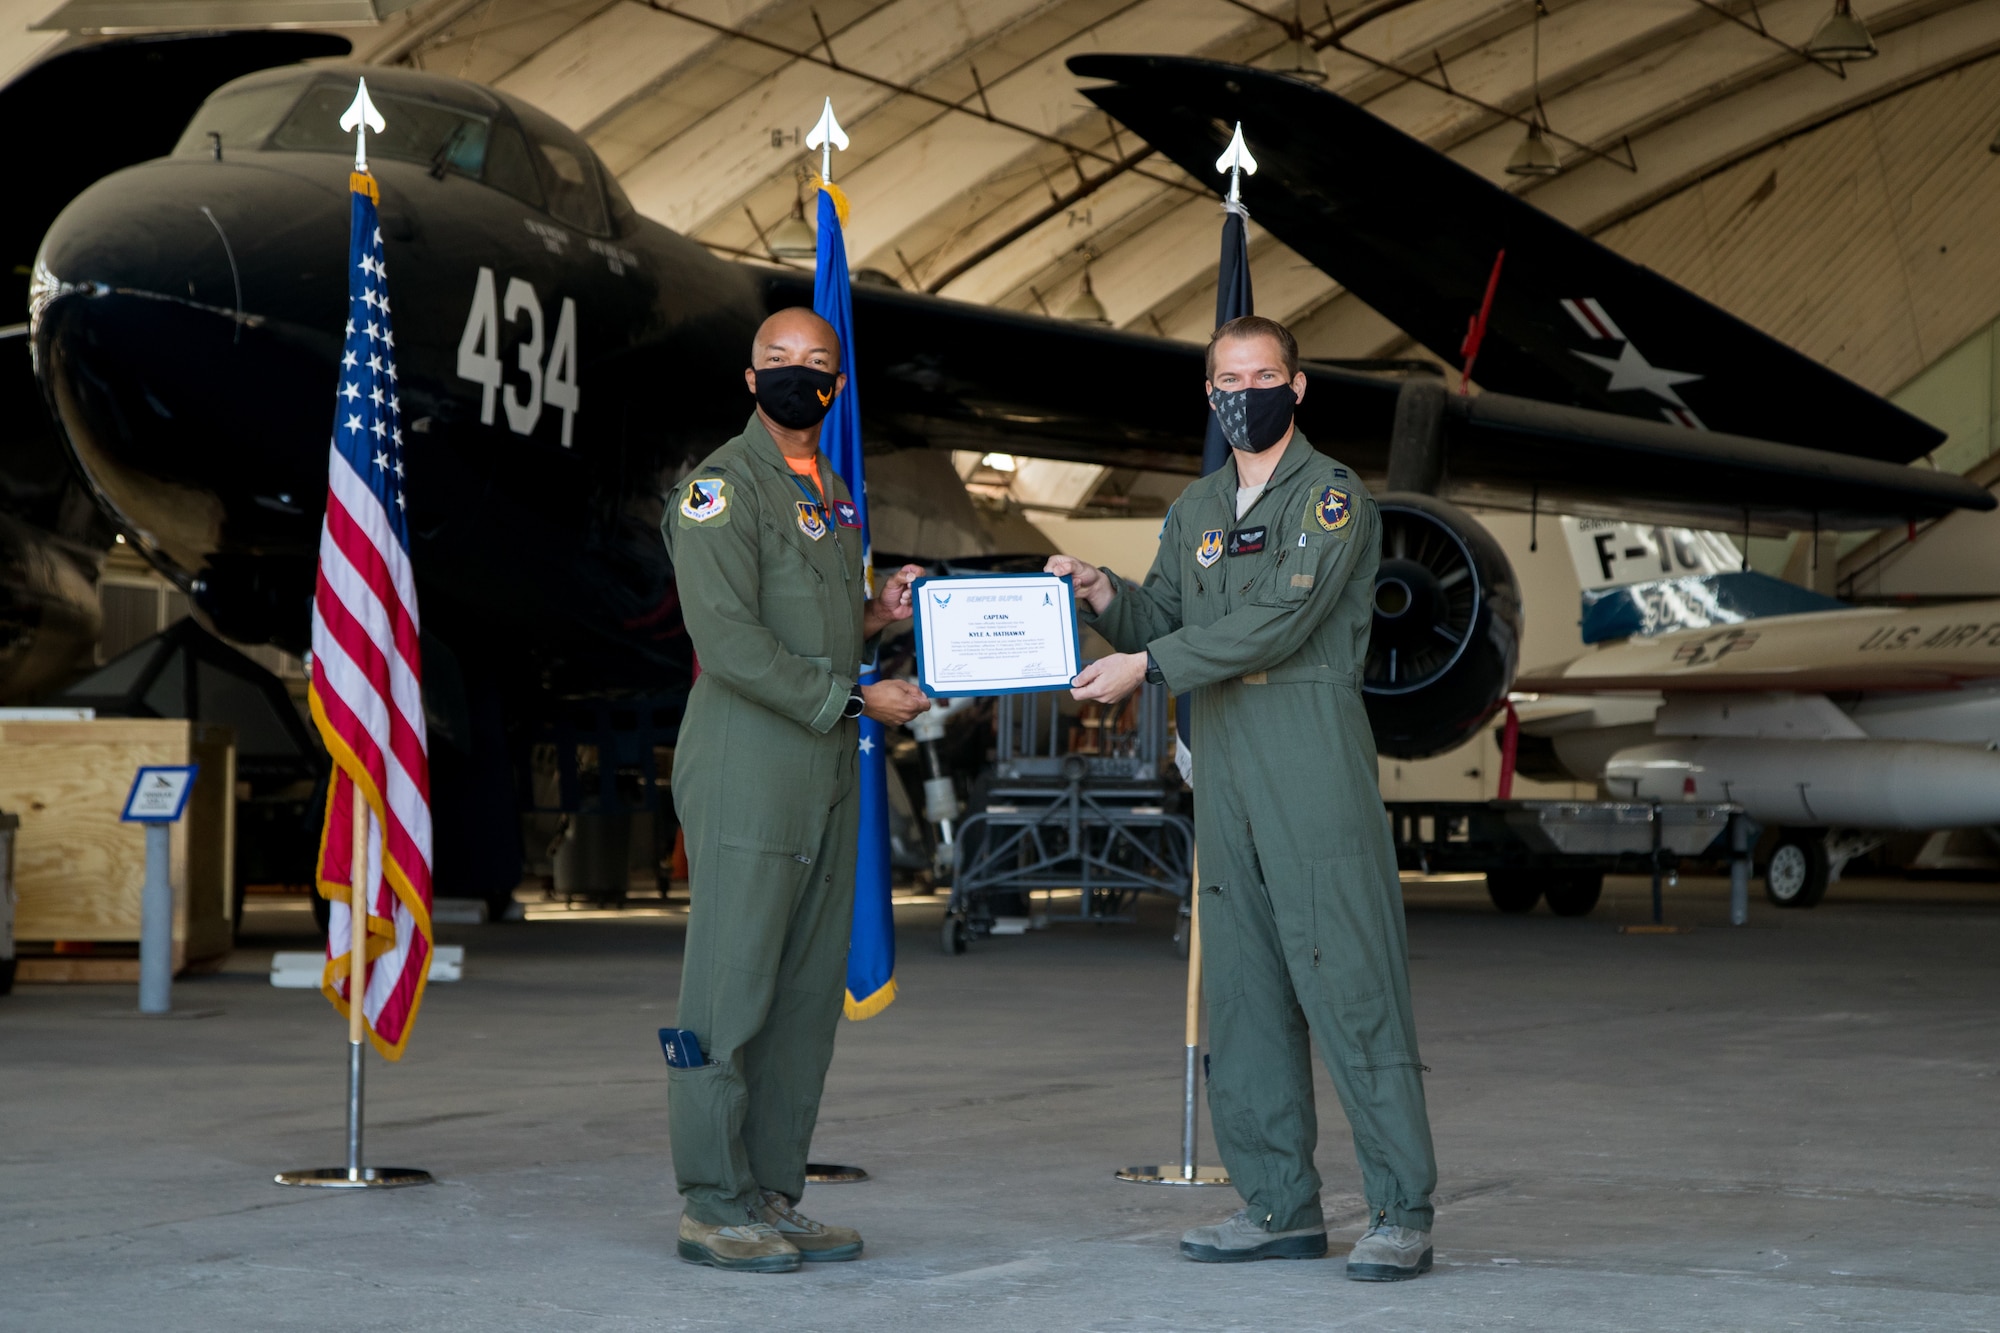 Capt. Kyle Hathaway, 461st Flight Test Squadron, originally of Portland, Oregon, accepts his U.S. Space Force certificate from Col. Randel Gordon, 412th Test Wing Vice Commander, during a Space Force Transfer Ceremony at Edwards Air Force Base, California, Feb. 11. (Air Force photo by Richard Gonzales)